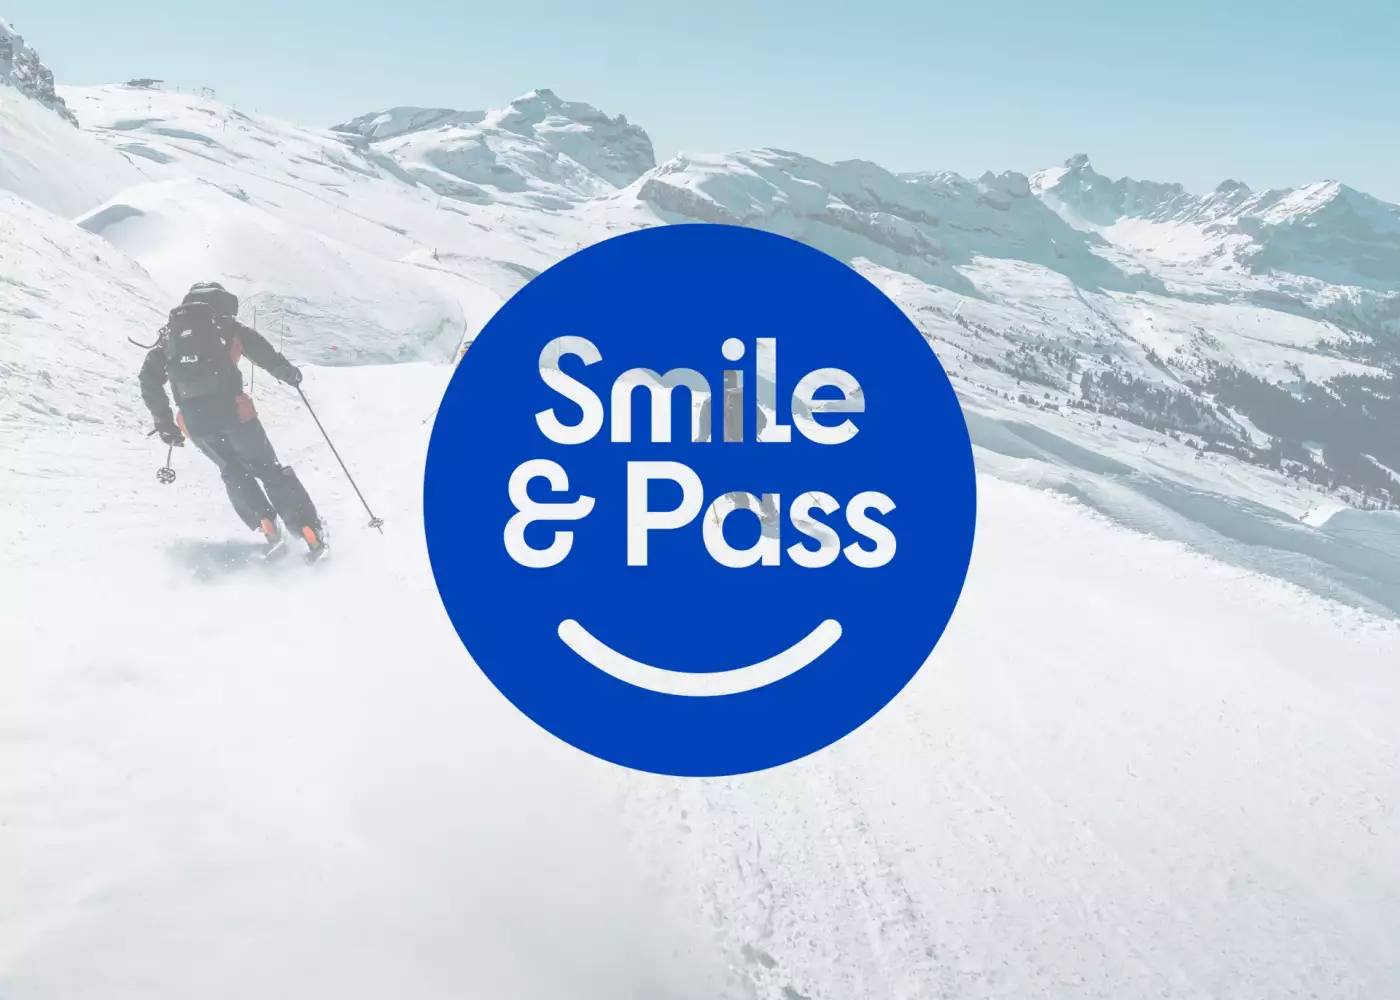 Smile&Pass by Mountain Collection Flaine